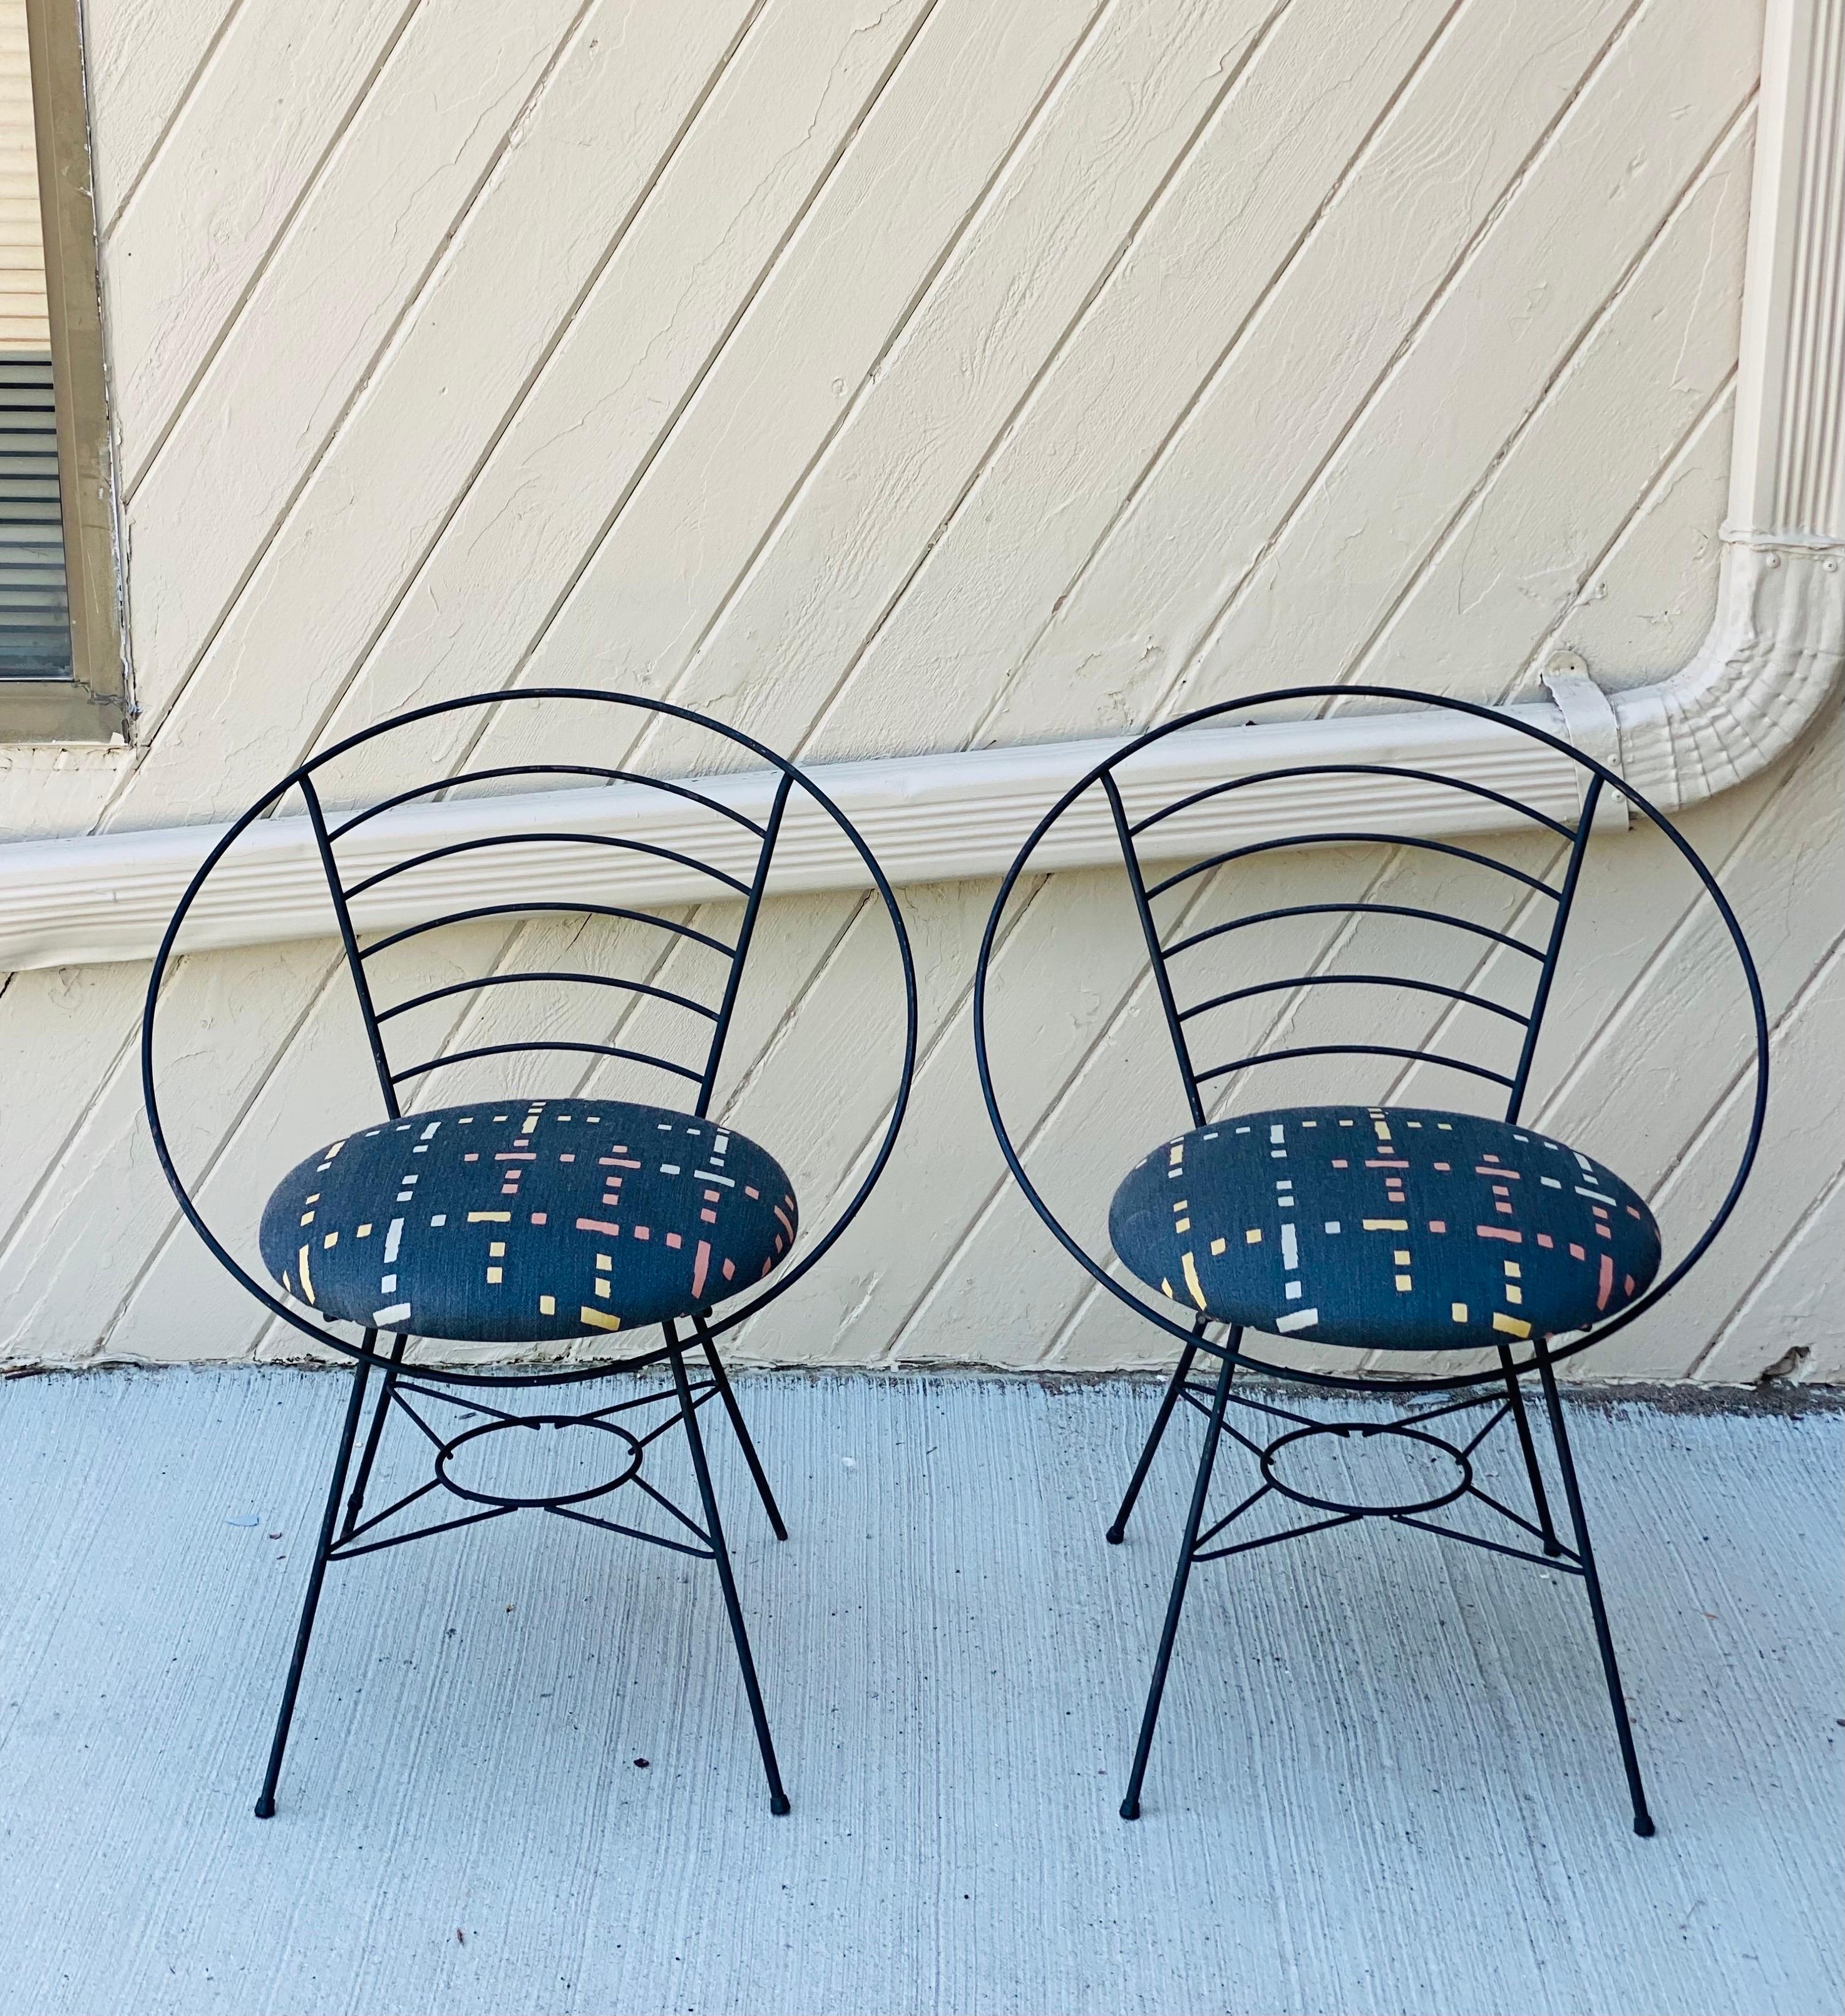 We are very pleased to offer a fun, modern pair of hoop chairs, circa the 1970s. This style of chair has always been a staple of midcentury style and has been interpreted by many different designers. These chairs showcase a streamlined, Minimalist